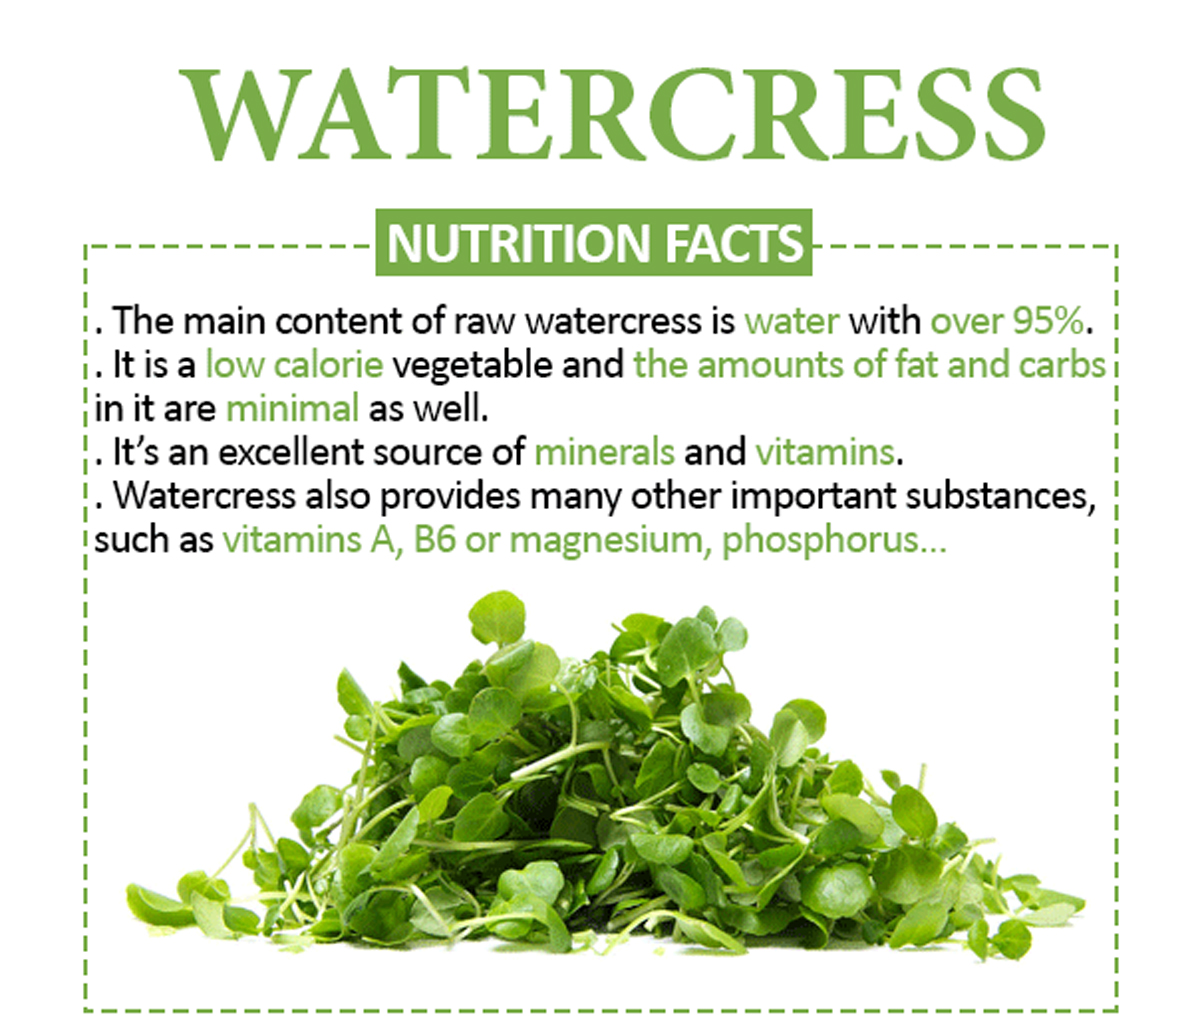 Watercress Calories and Nutrition Facts